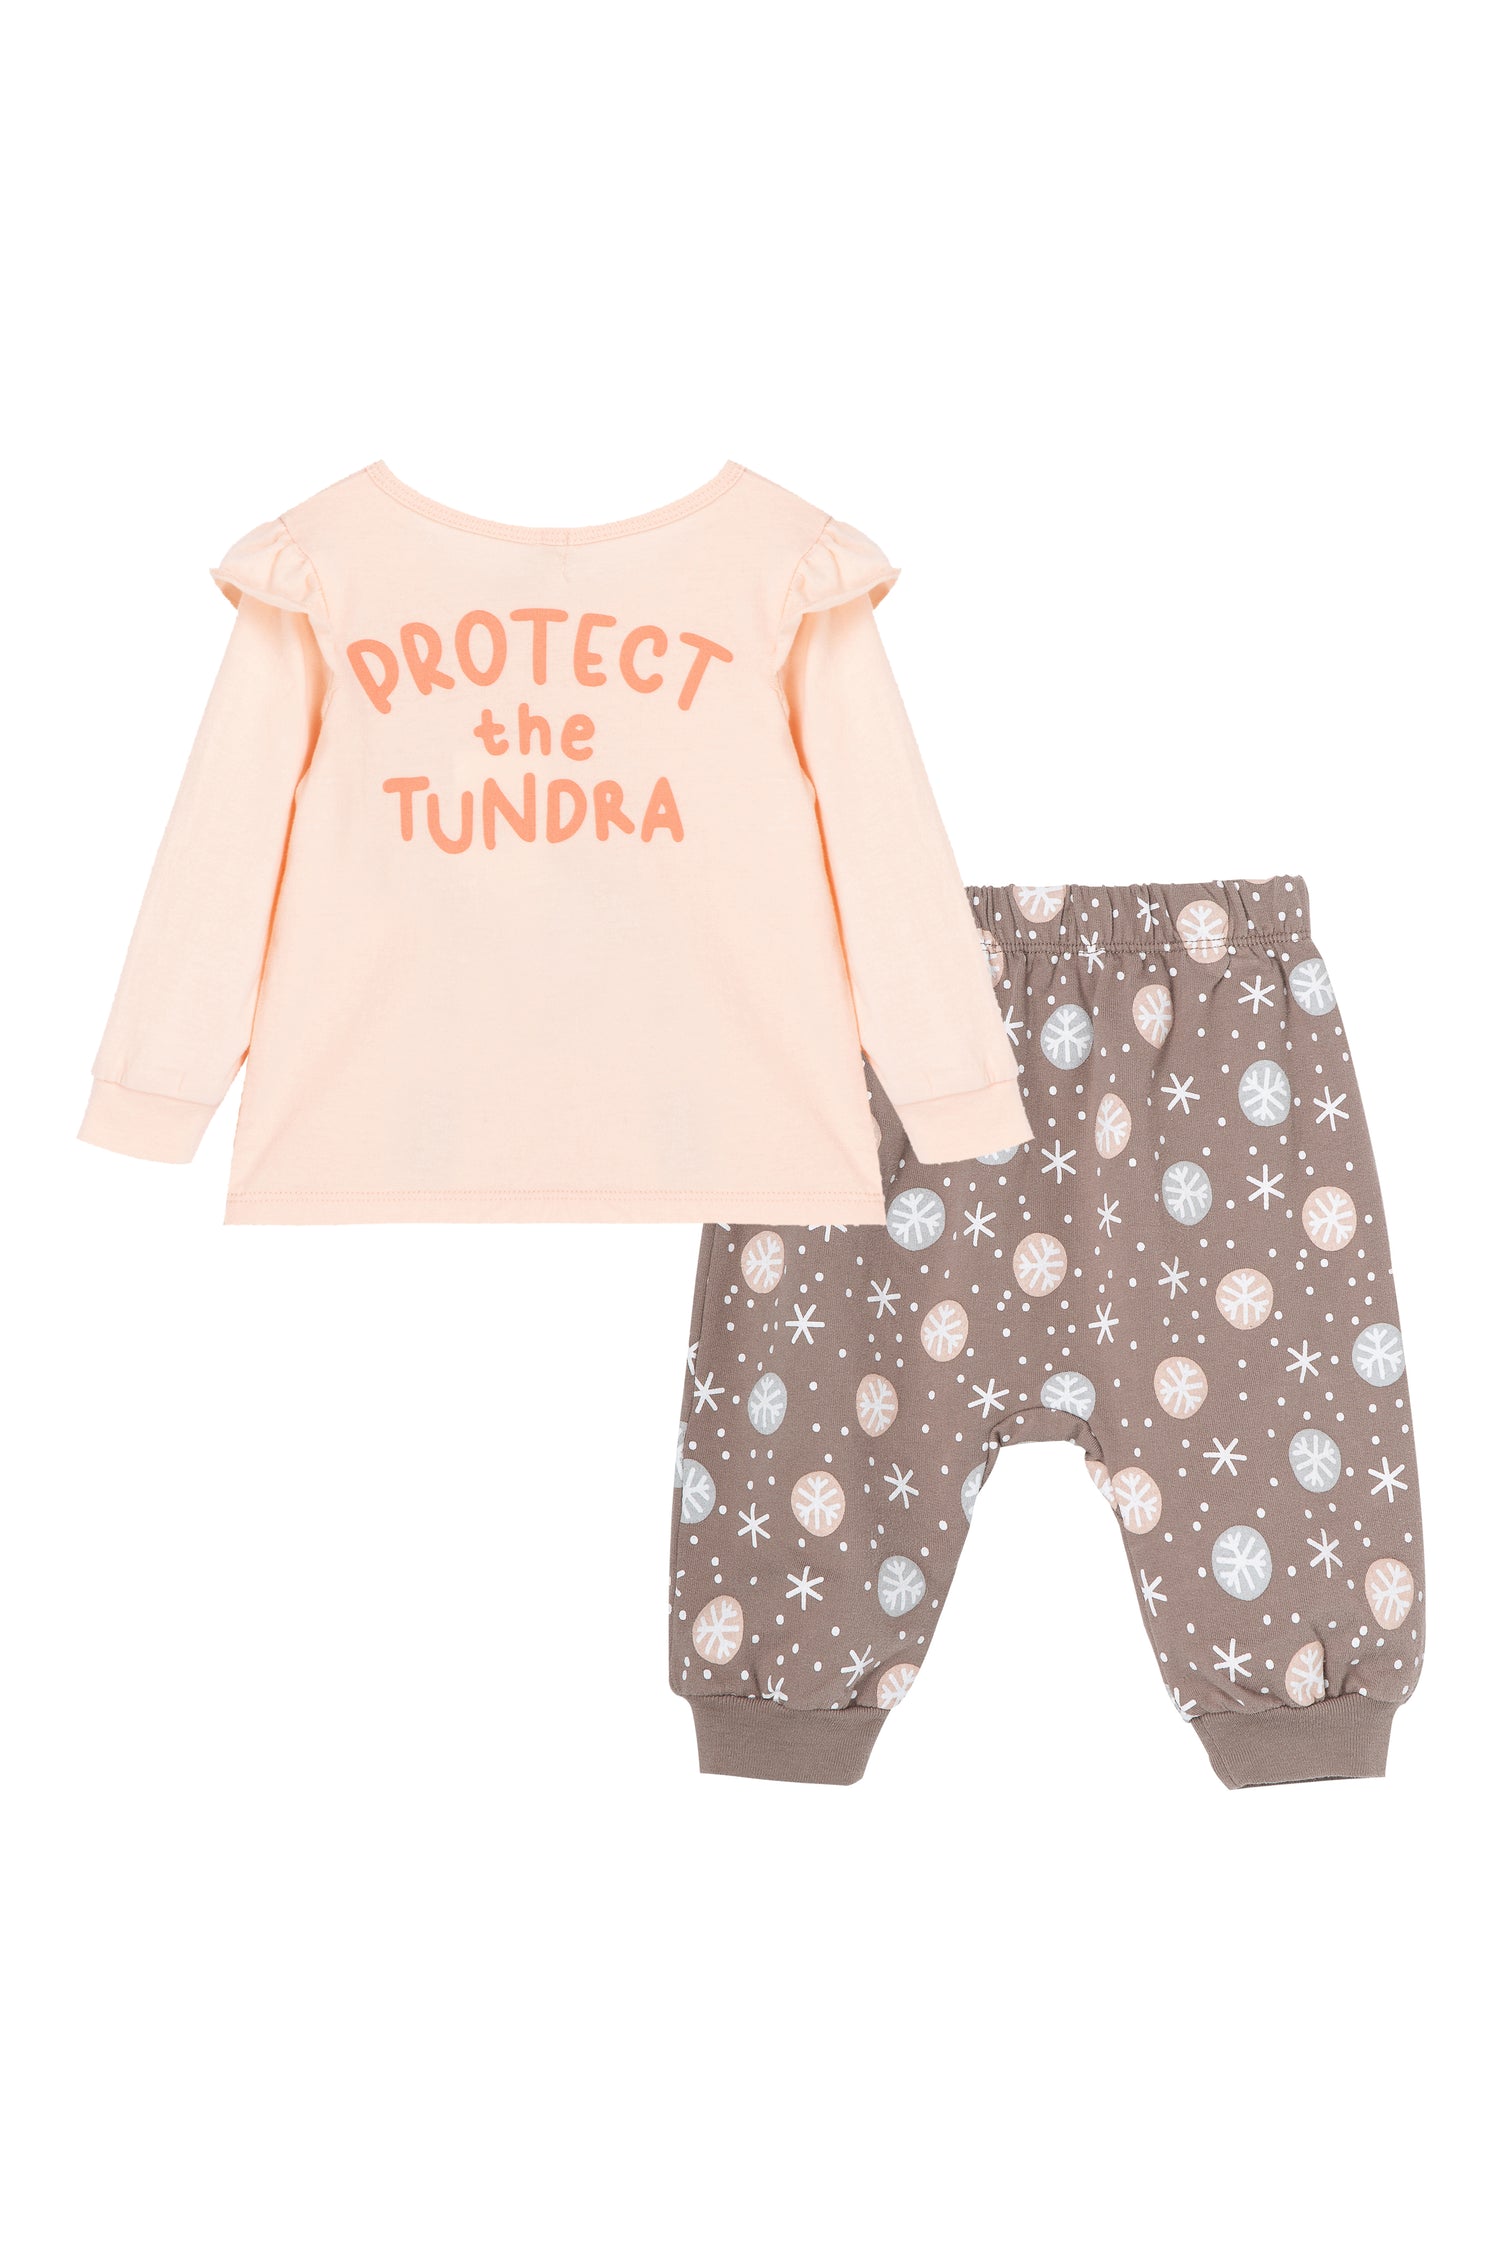 Front view of pink and brown shirt and pant set with "Protect the tundra" wording 